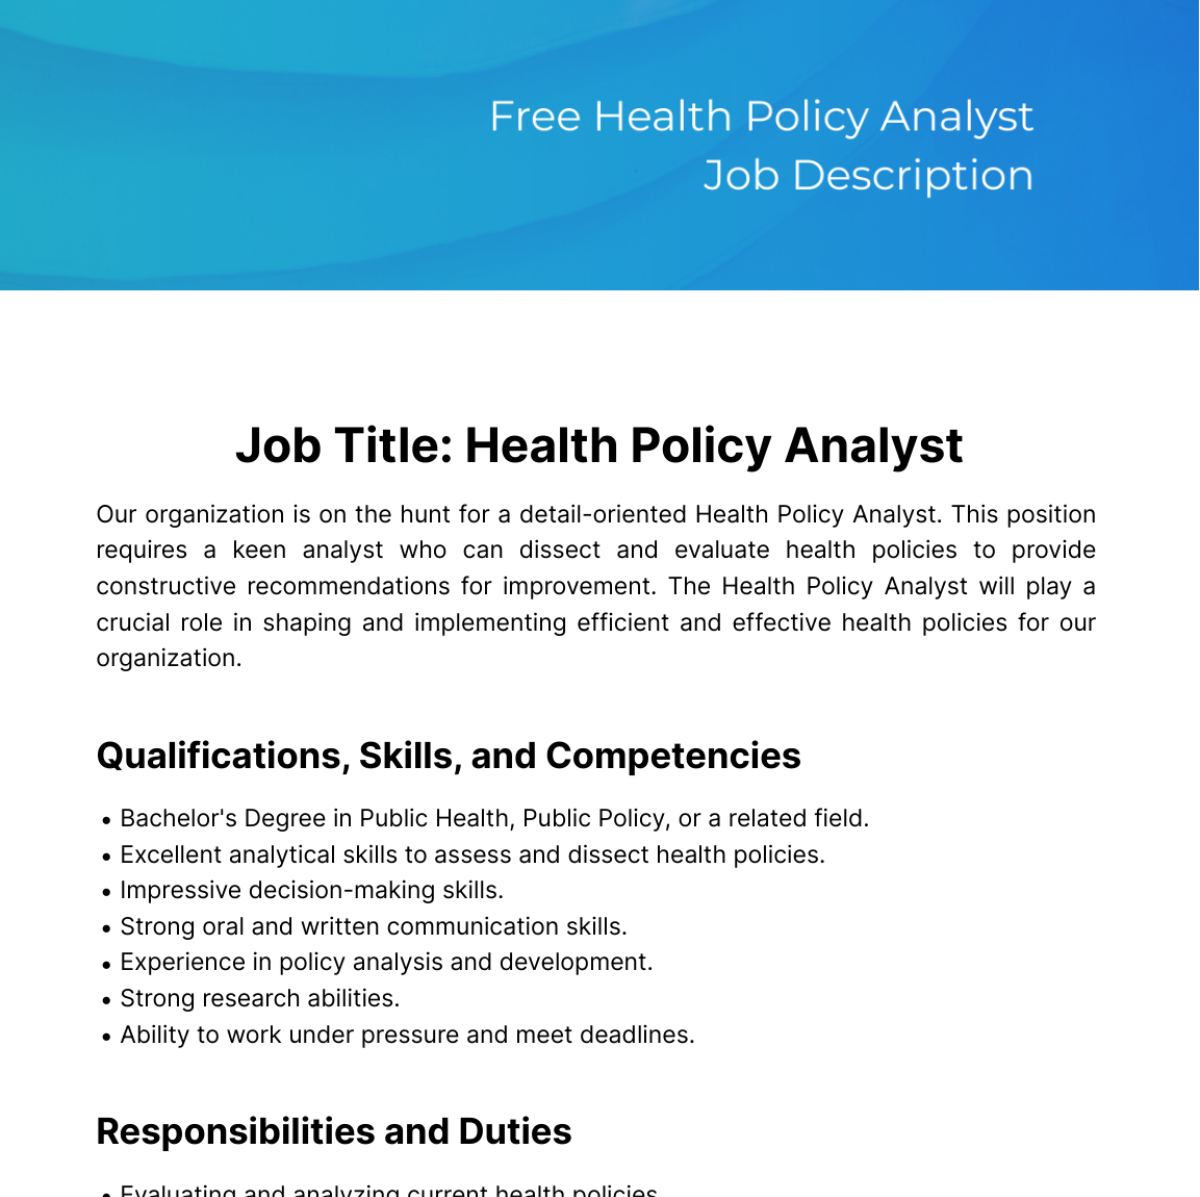 Health Policy Analyst Job Description Template